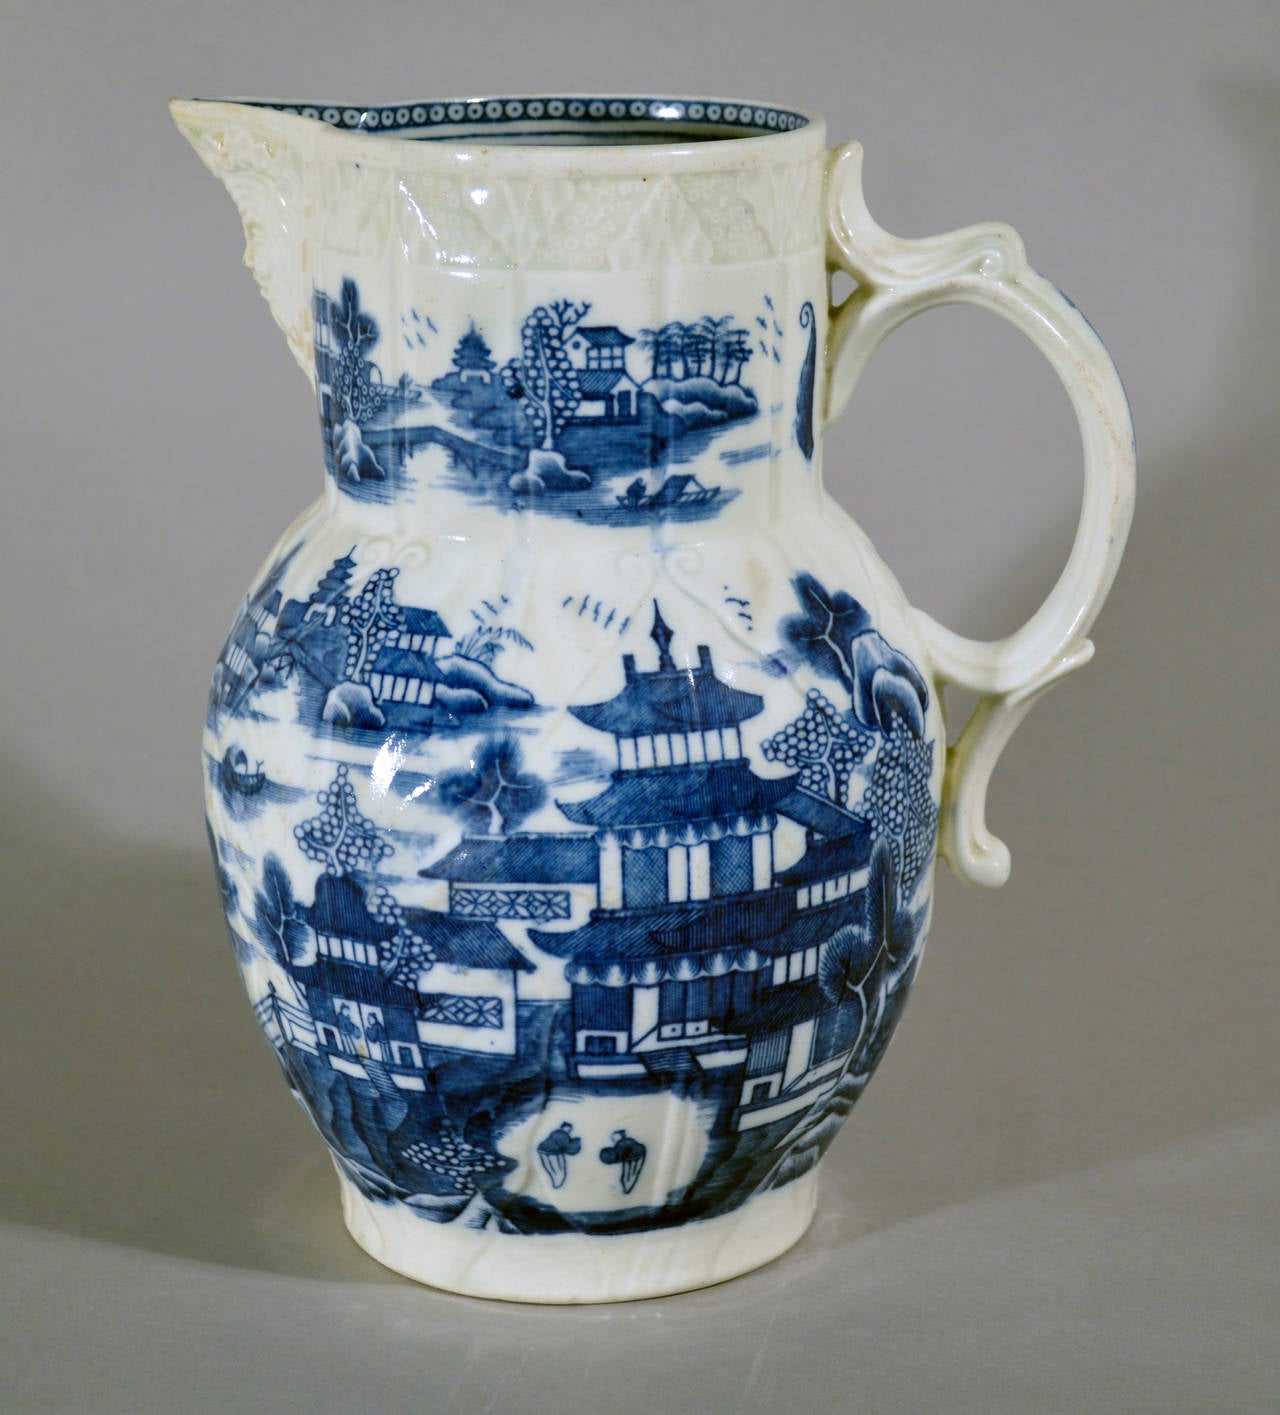 The jug moulded and printed in underglaze blue.  The Conversation pattern is a rare Chinese-style design. It is named after the two small figures in the design who appear to be in conversation. Circa 1780.